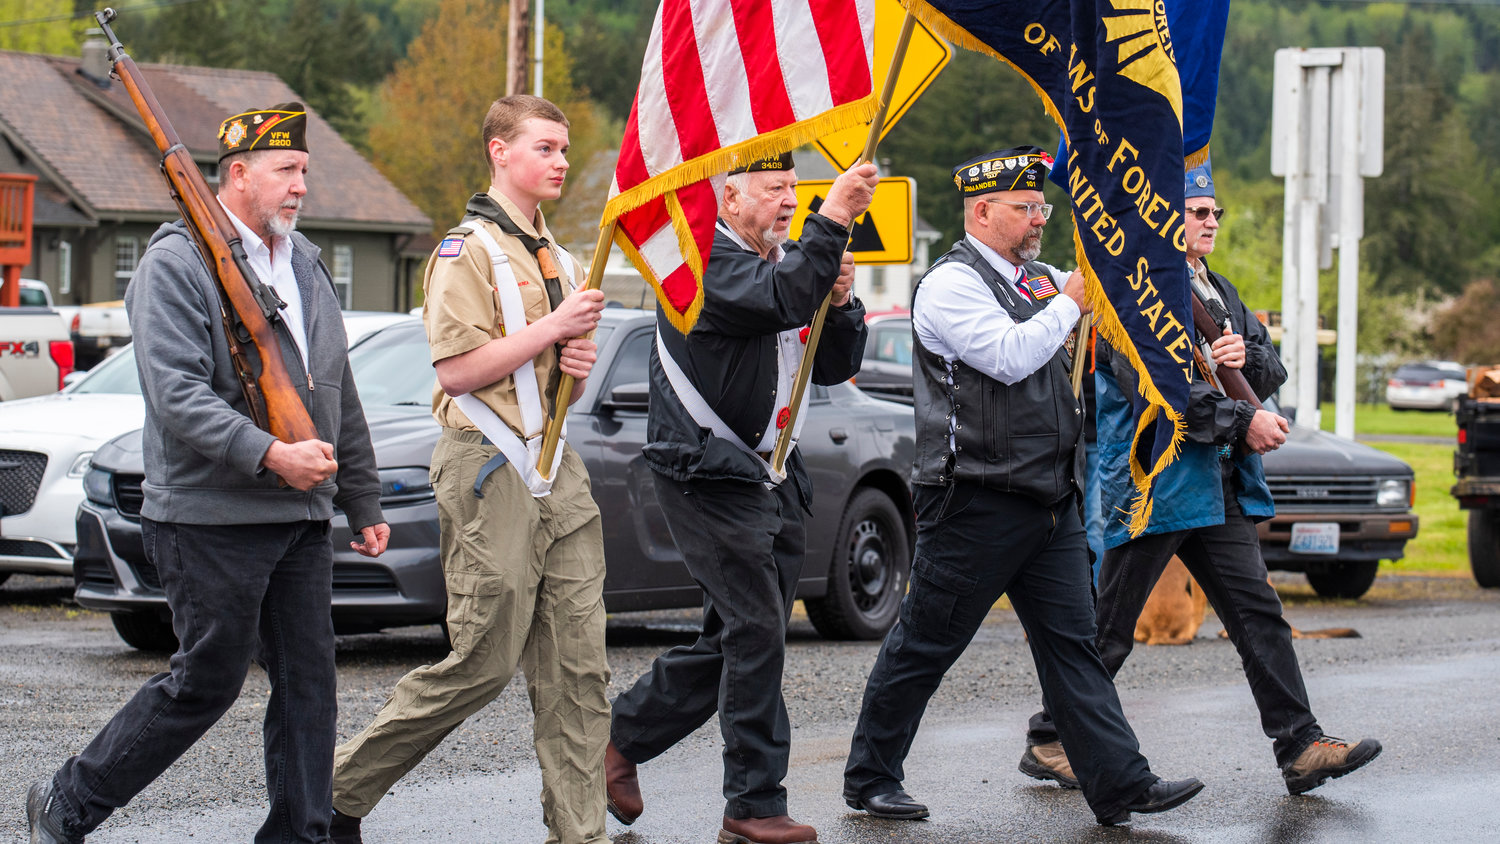 A color guard leads the Vader May Day Parade with flags and rifles on display Saturday morning.